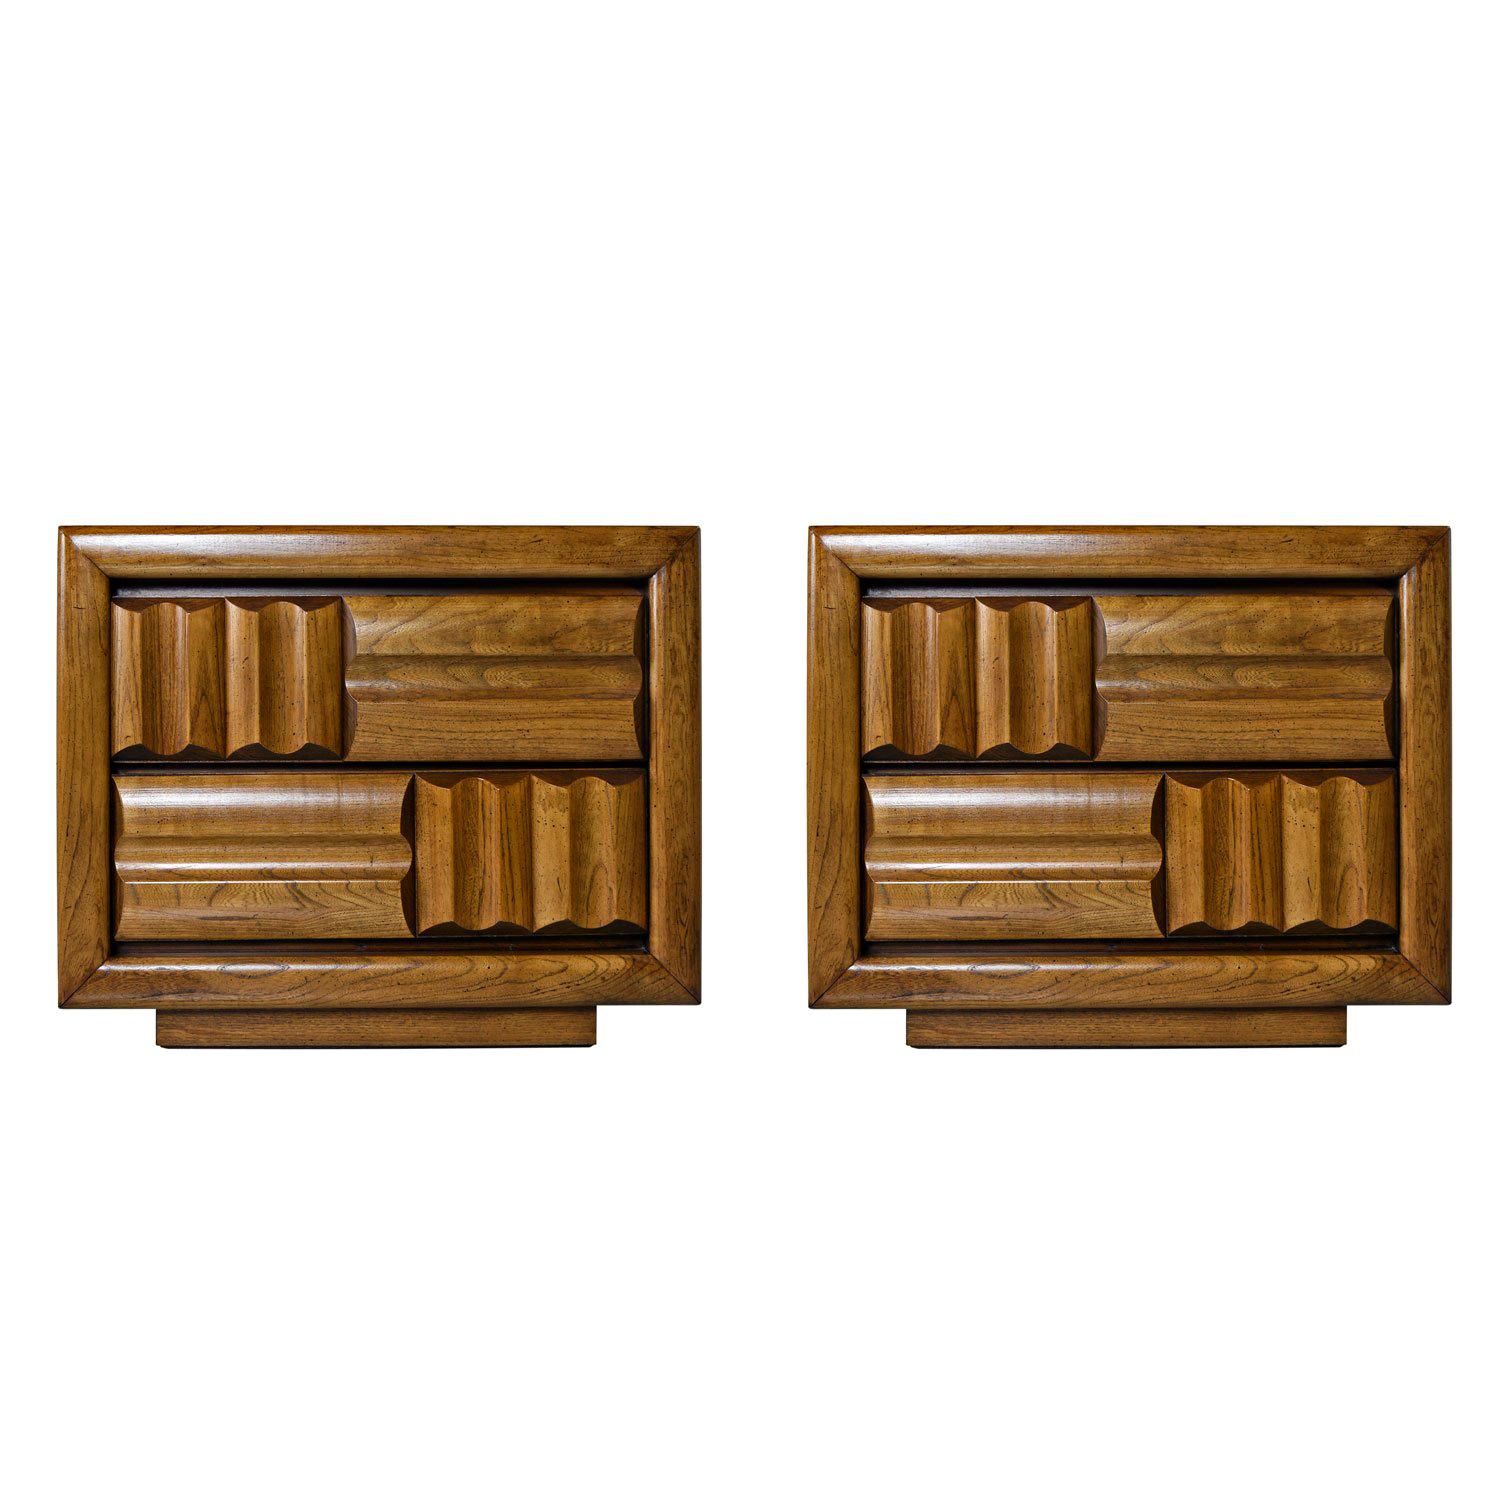 Mid-Century Modern Brutalist oak nightstand end tables, circa early 1970s. Thick, sculpted, contrasting and intersecting bands of solid oak adorn the fronts. This look exemplifies the Brutalist aesthetic. Bold, monumental form is sure to make a